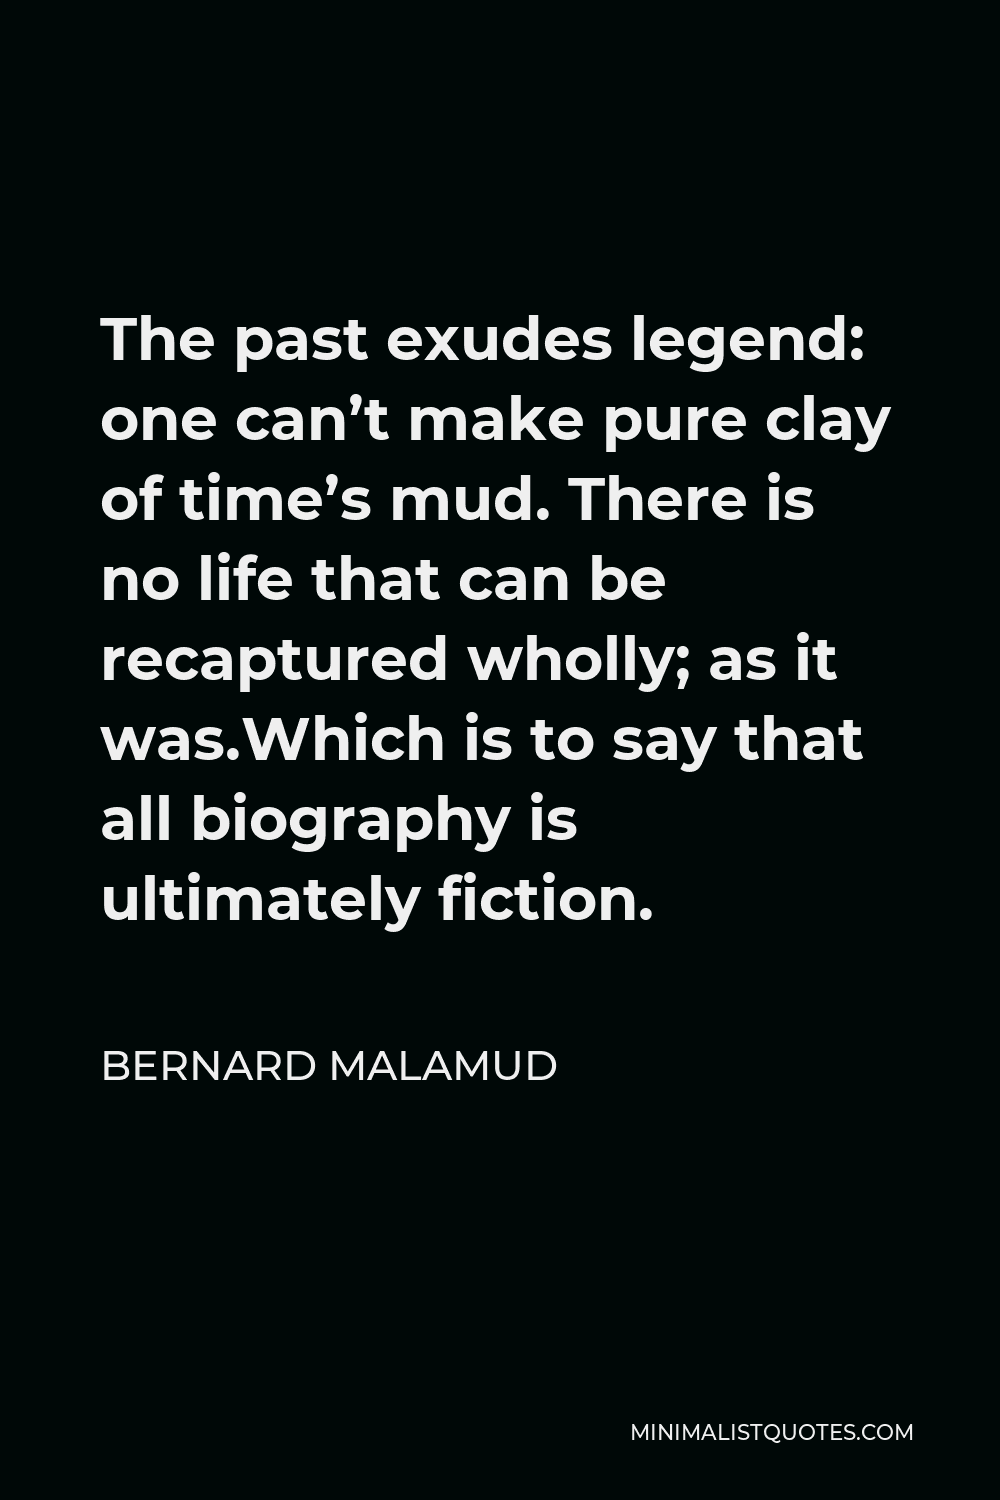 Bernard Malamud Quote - The past exudes legend: one can’t make pure clay of time’s mud. There is no life that can be recaptured wholly; as it was.Which is to say that all biography is ultimately fiction.